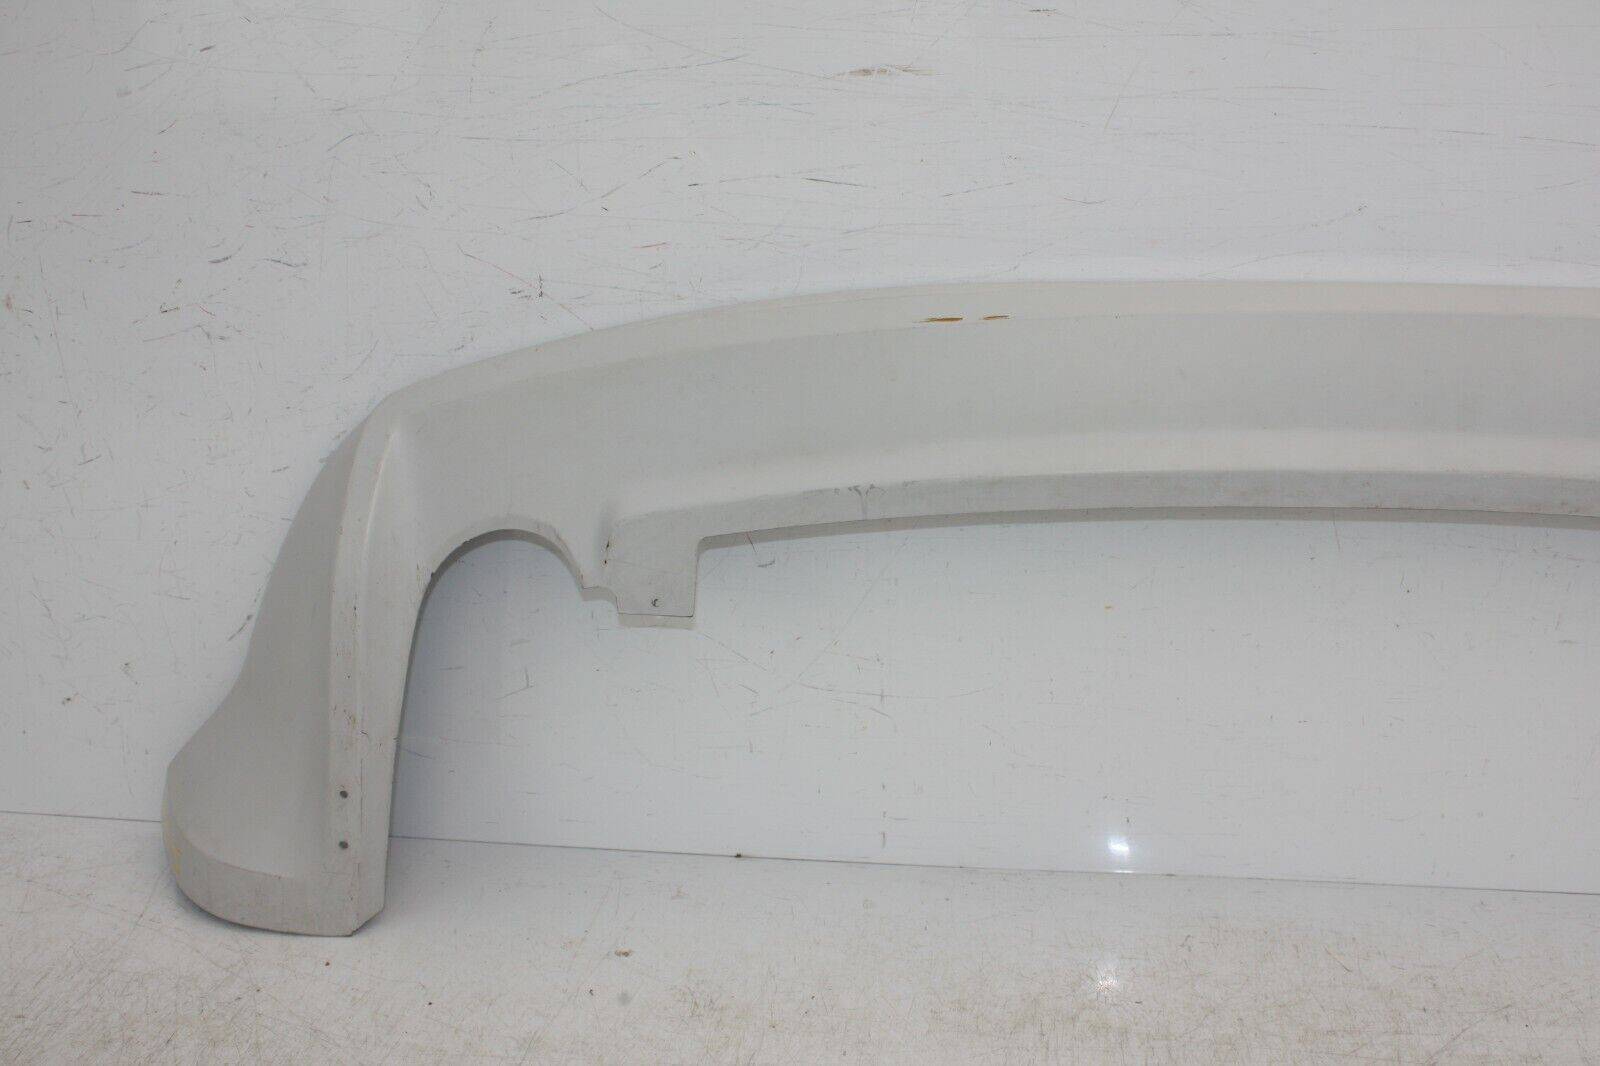 Ford-C-Max-Rear-Bumper-skirt-2004-To-2007-3M5J17B891AAW-175367535992-5